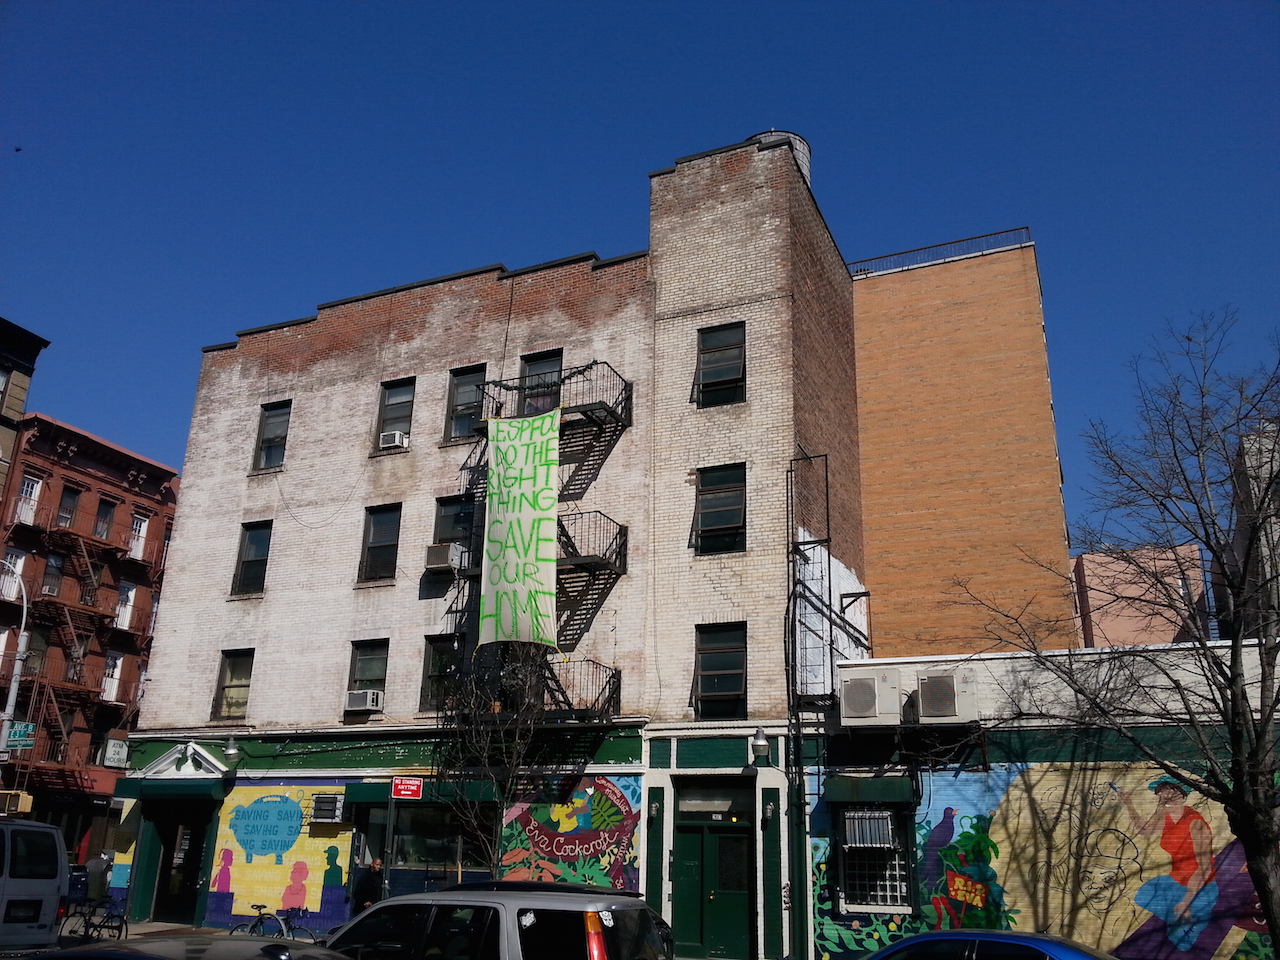 Residential tenants at 37 Avenue B say the L.E.S. People’s Federal Credit Union has been massively underpaying its rent for years — jeopardizing the entire building. Tenants recently hung banners on the side of the building in a desperate plea for help.